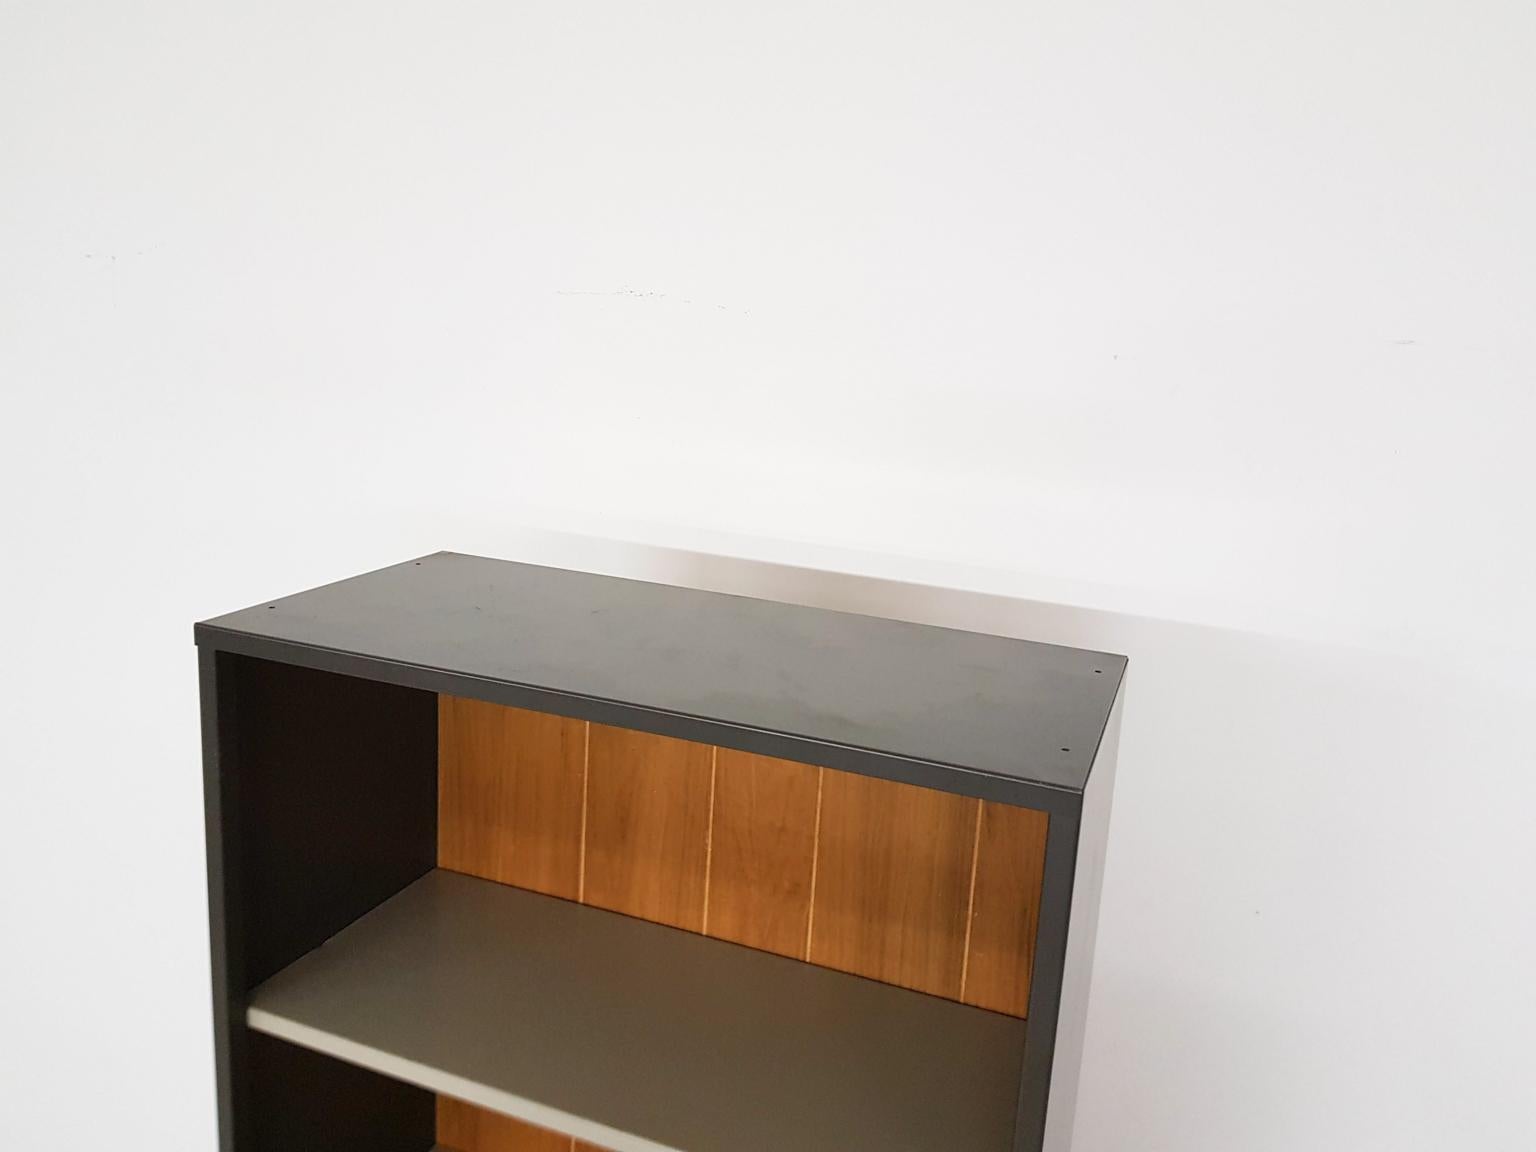 Midcentury Cabinet or Bookcase by Coen de Vries for Pilastro, the Netherlands 6